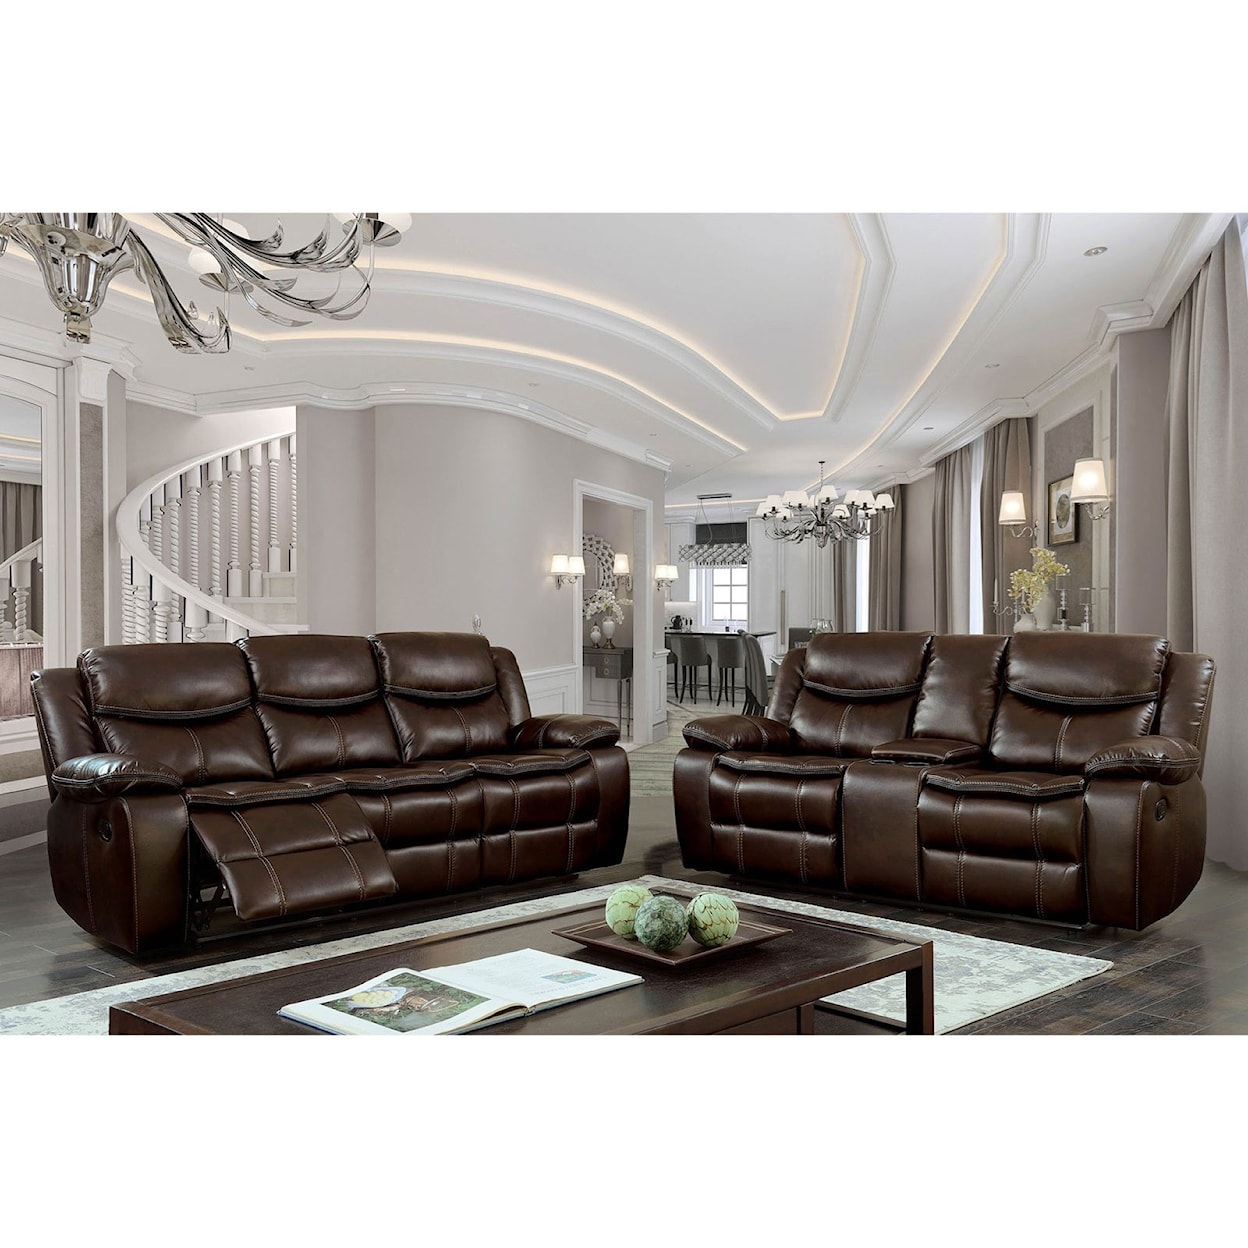 Furniture of America Pollux Reclining Sofa and Loveseat w/ Console Set